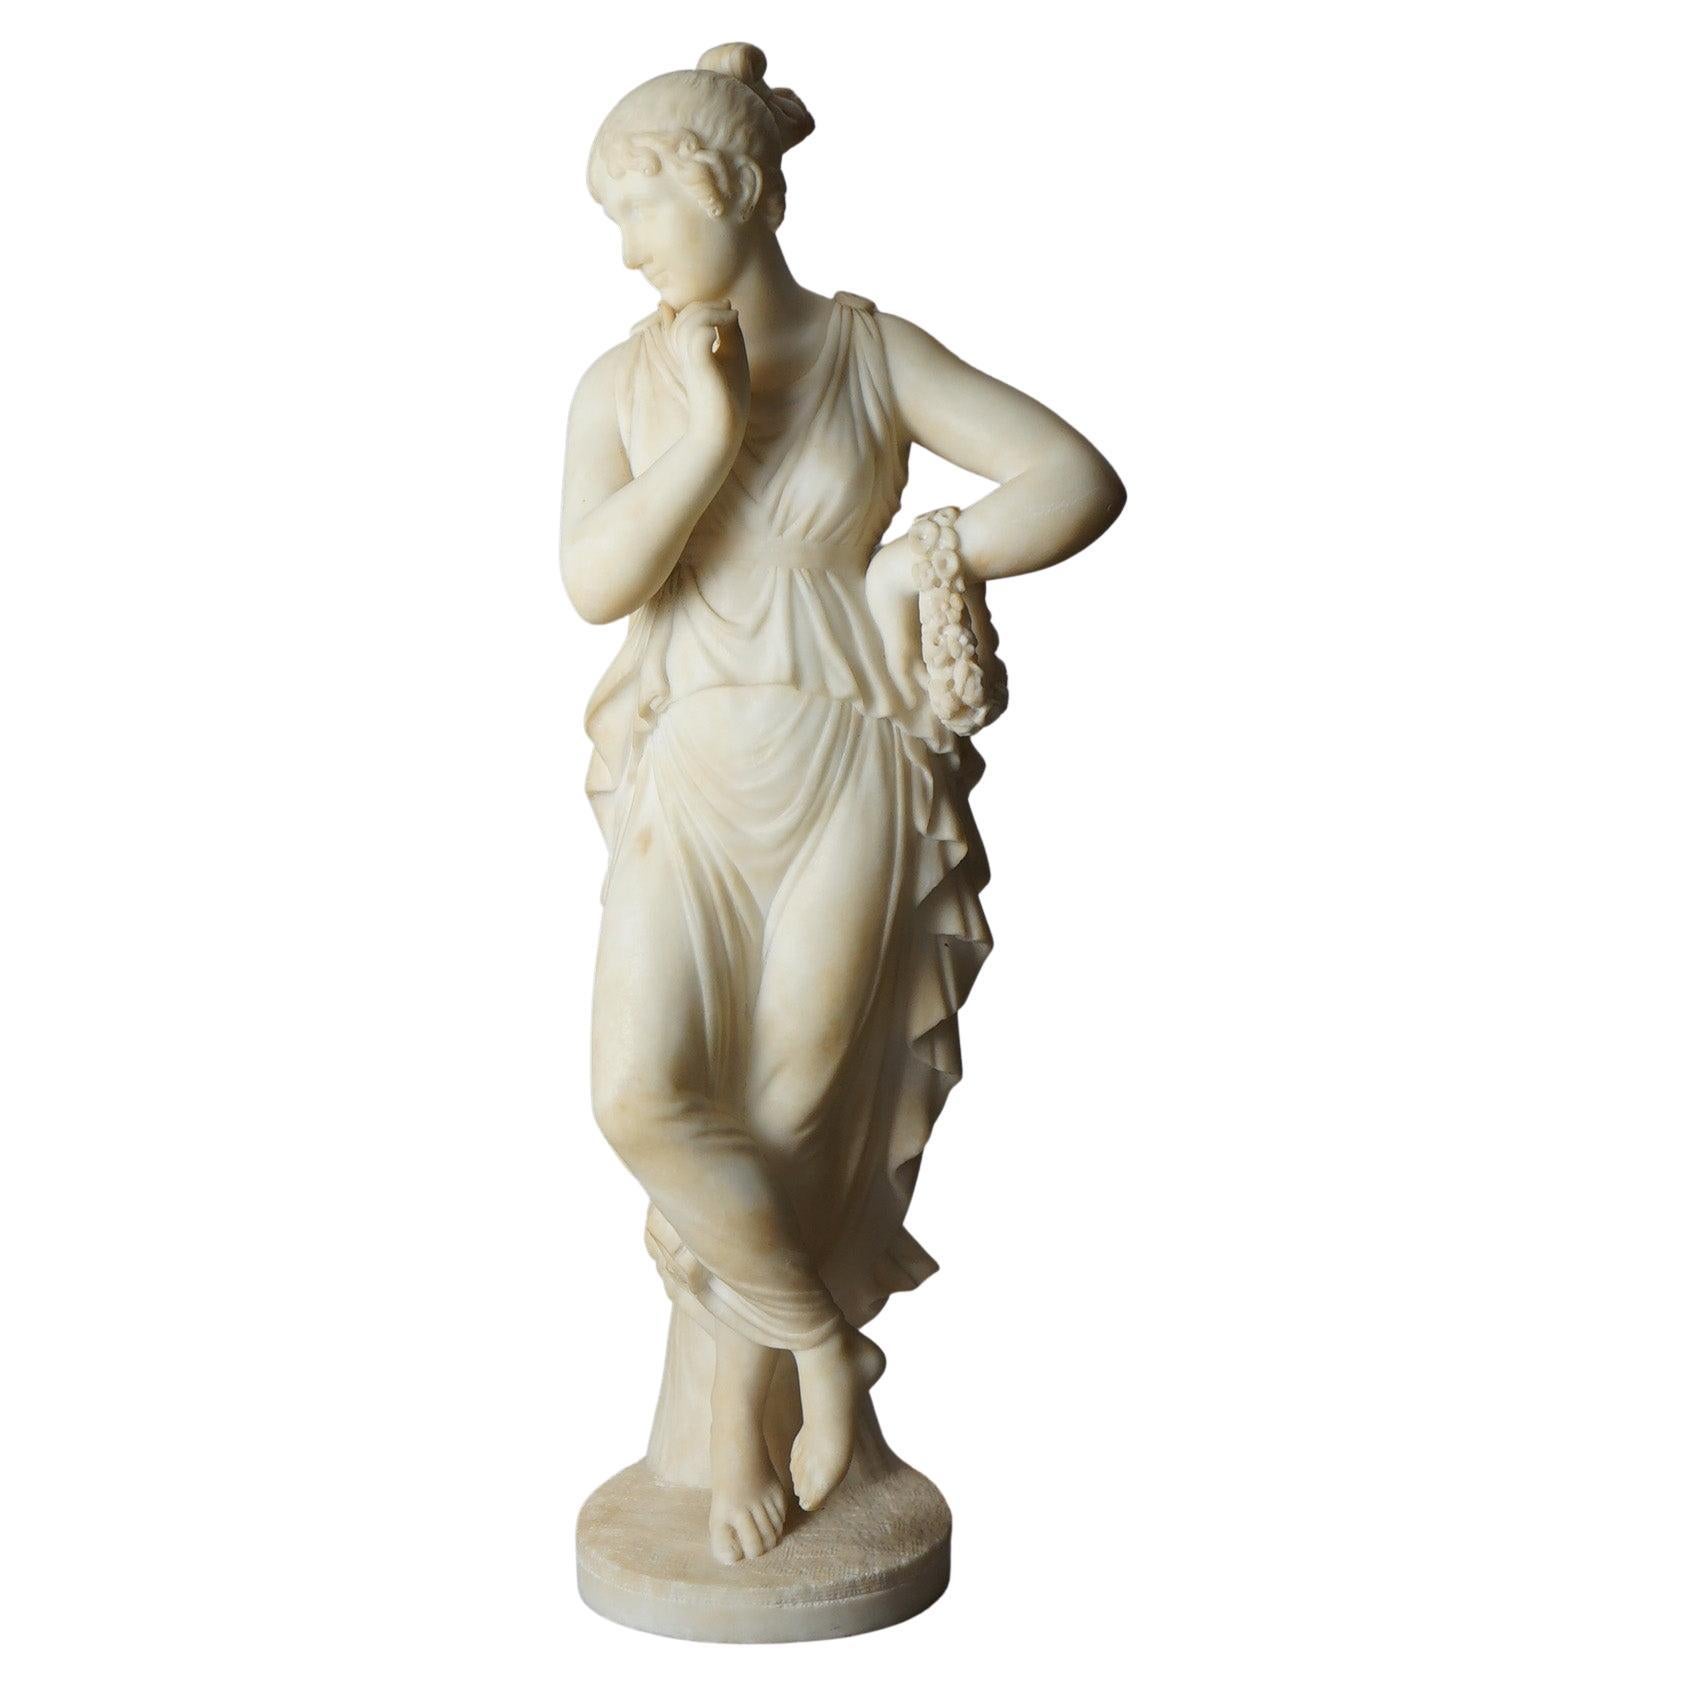  Antique Classical Alabaster Sculpture of a Woman by P. Bazzanti, Florence 19thC For Sale